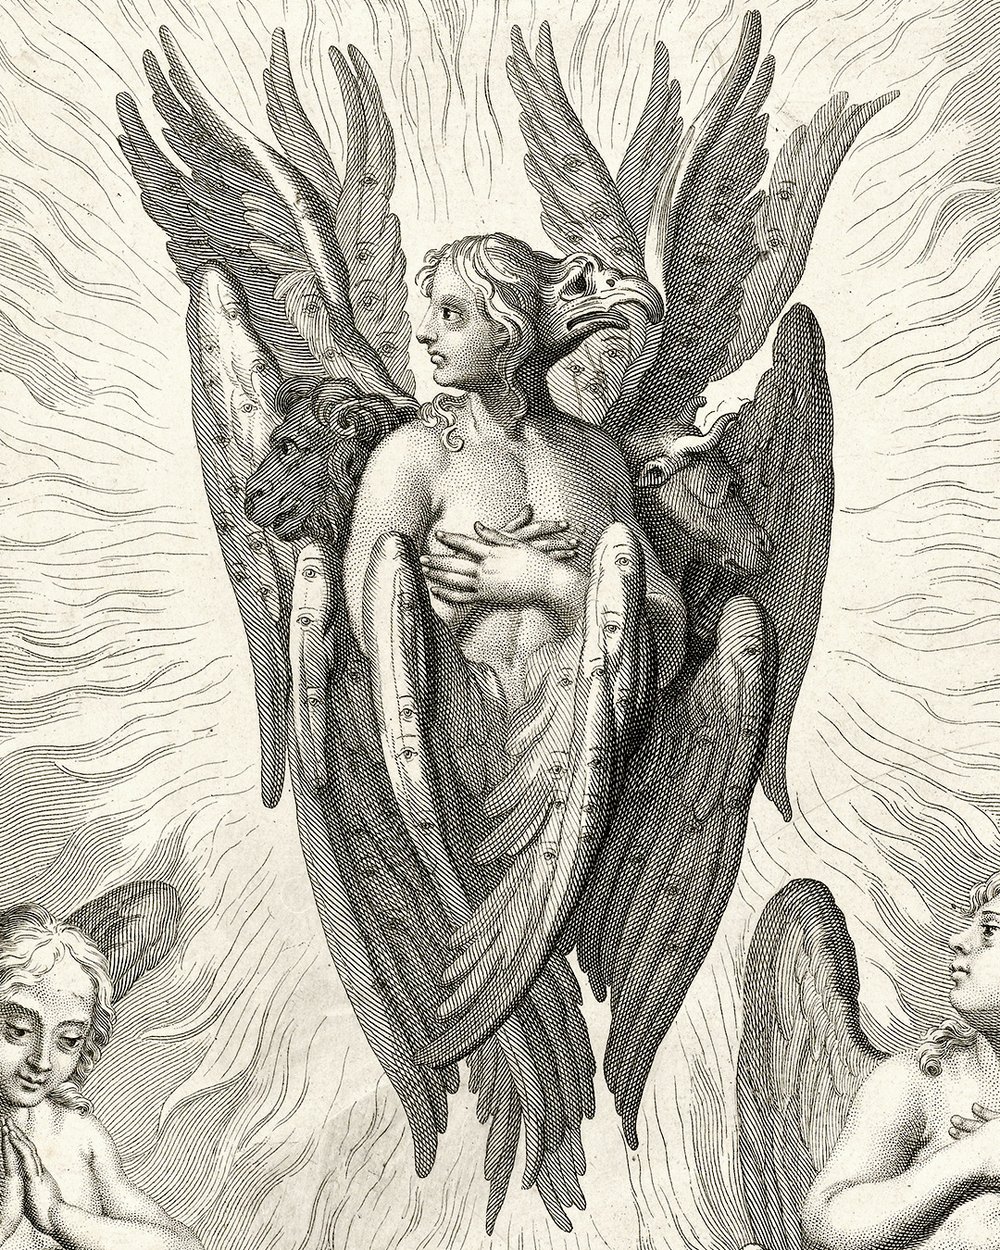 "Three seraphim in different forms" (1681 - 1746)